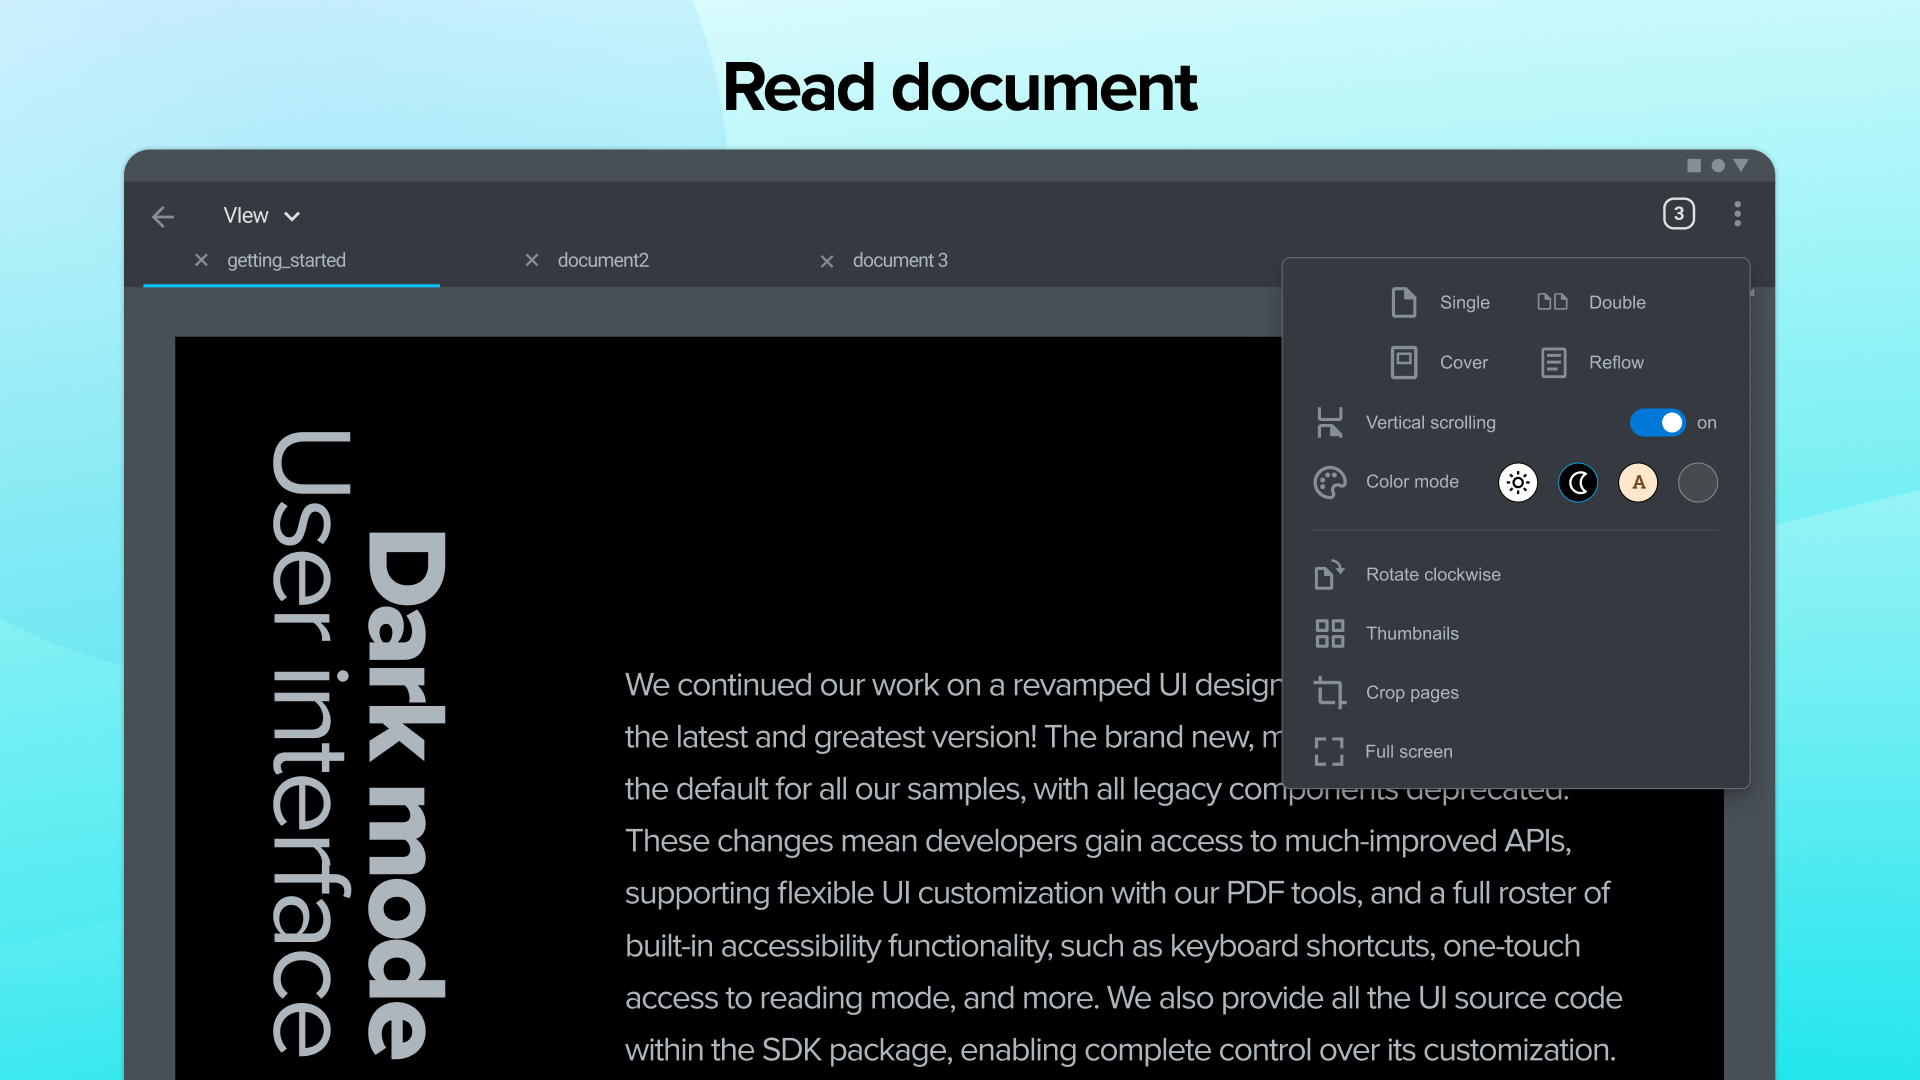 Night mode lets you comfortable read documents in dim light.